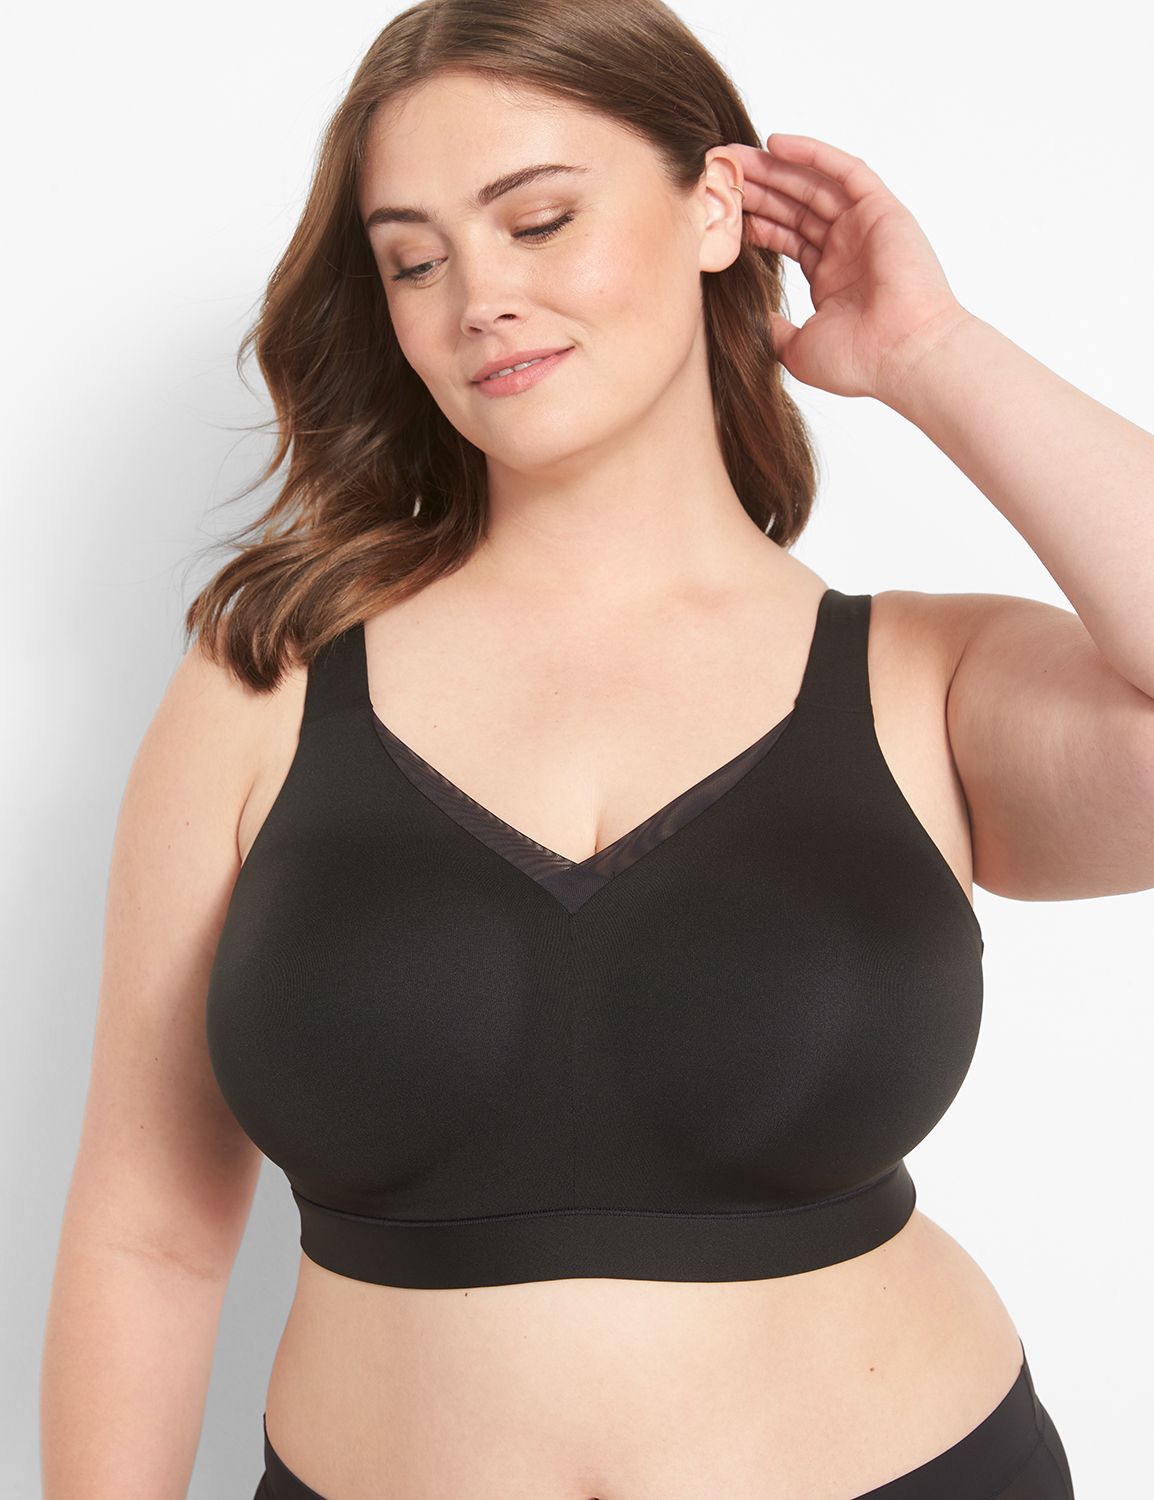 Glamorise Magiclift Active Support Wire-Free Bra - Wine - Curvy